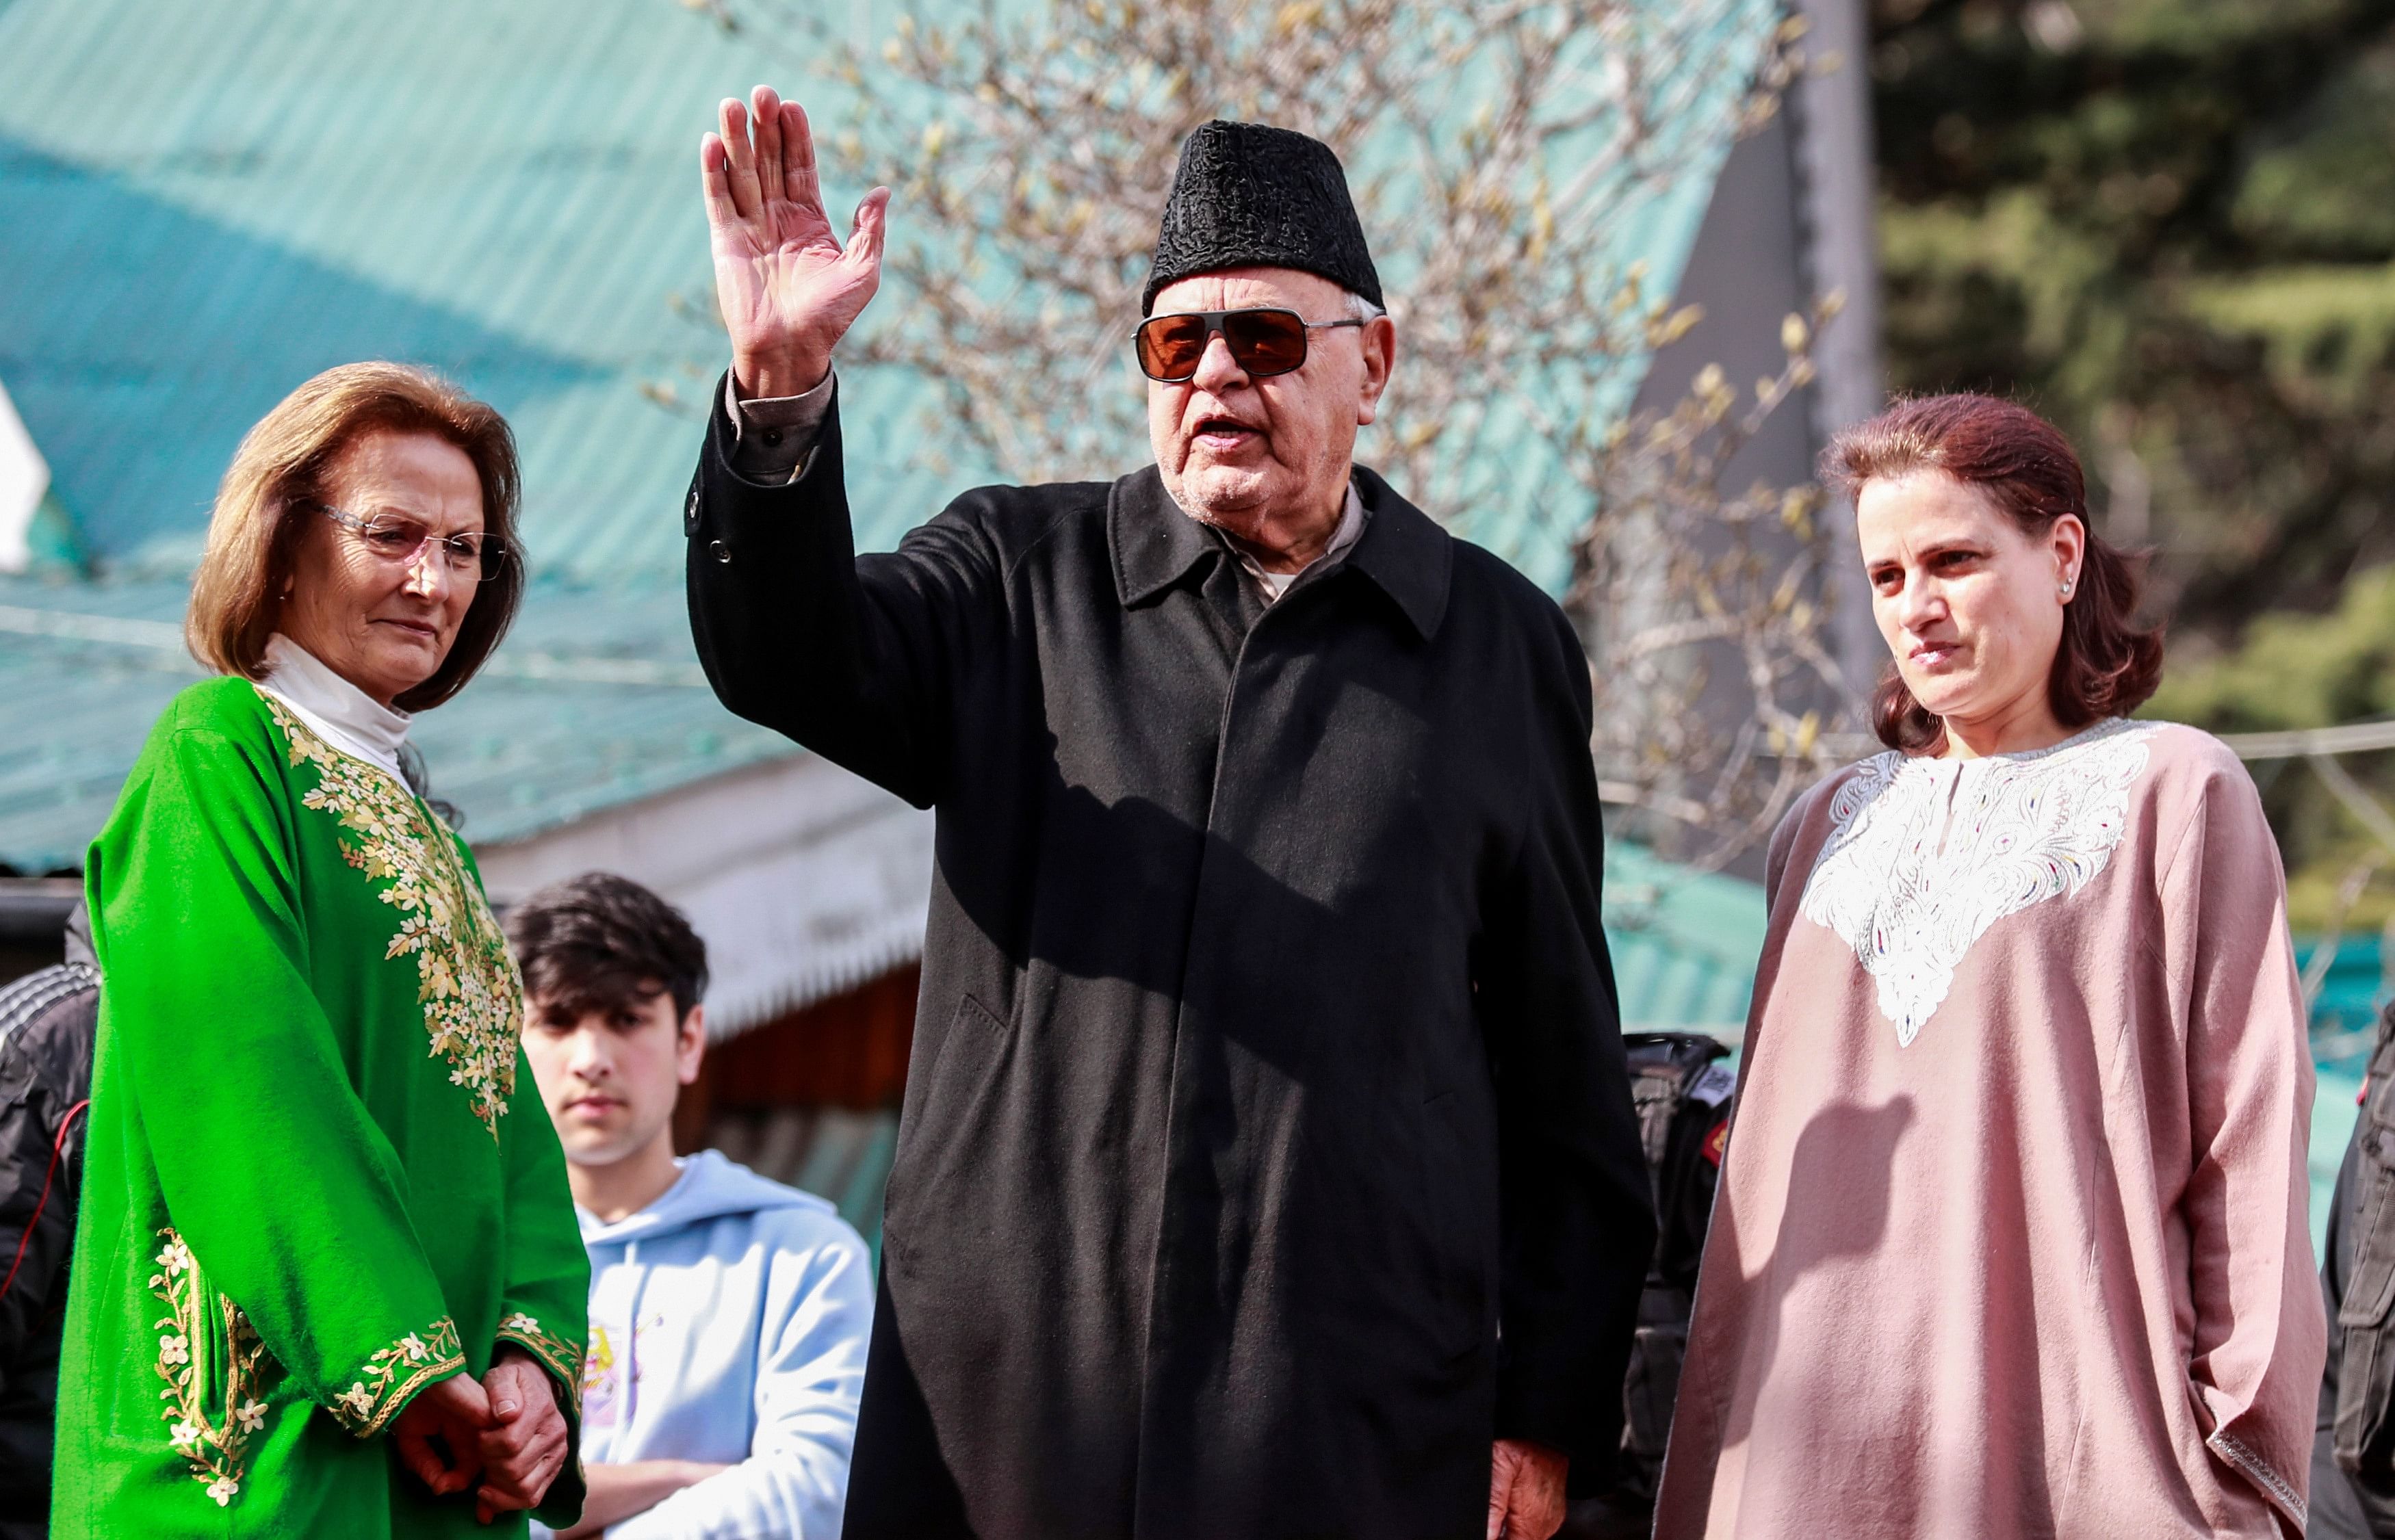 Farooq Abdullah, a lawmaker and leader of National Conference, speaks to media after his release at his residence in Srinagar. (Credit: Reuters)